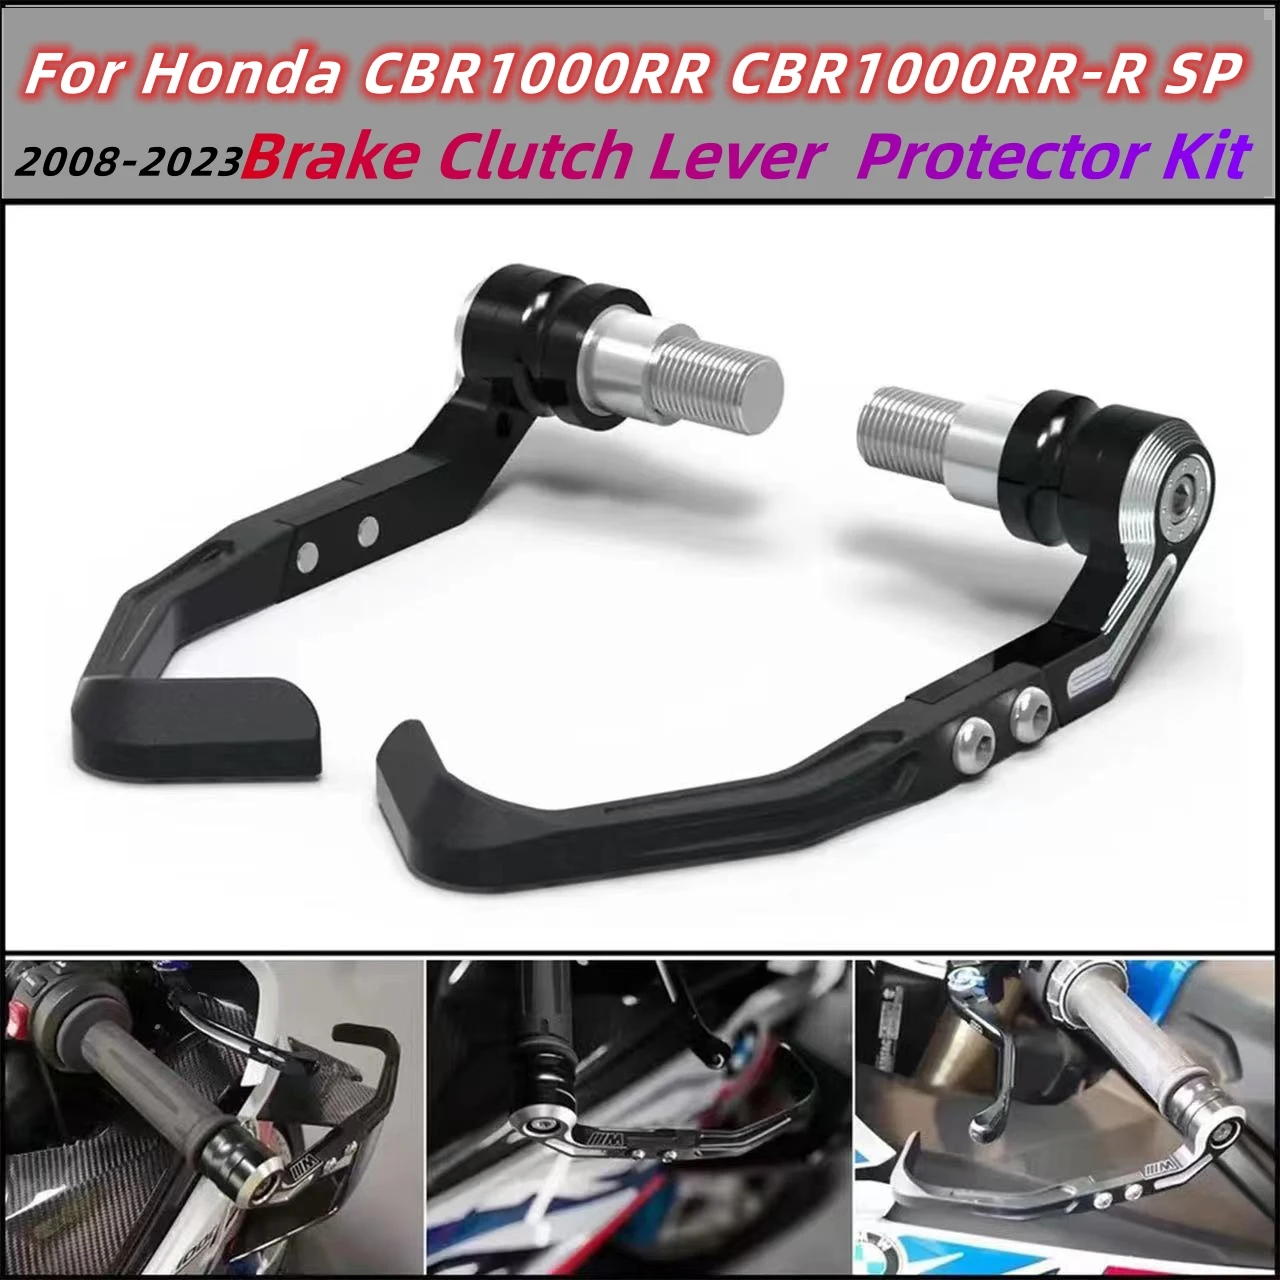 

Motorcycle Brake and Clutch Lever Protector Kit For Honda CBR1000RR CBR1000RR-R SP 2008-2023